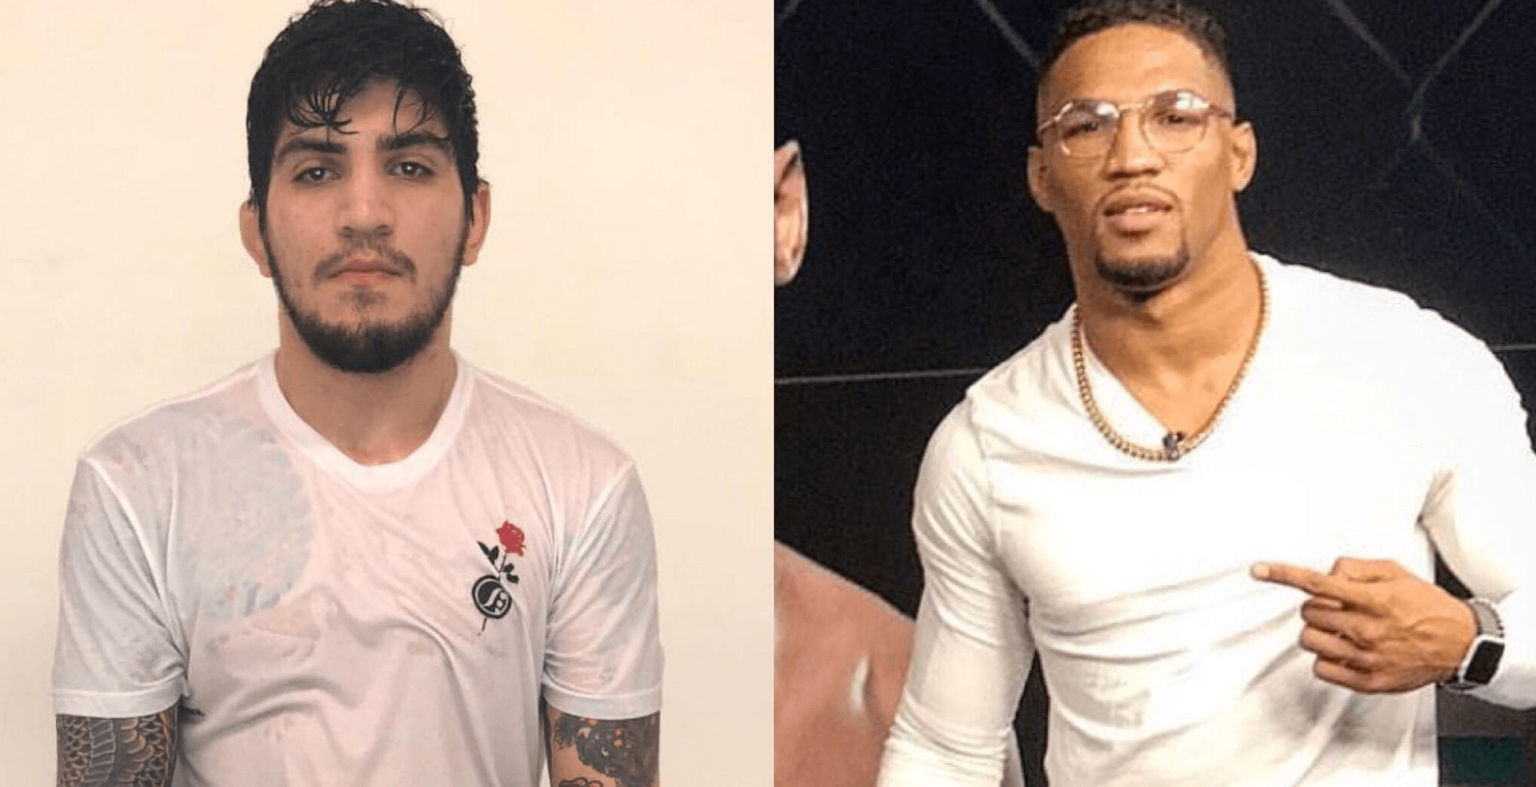 Dillon Danis and Kevin Lee